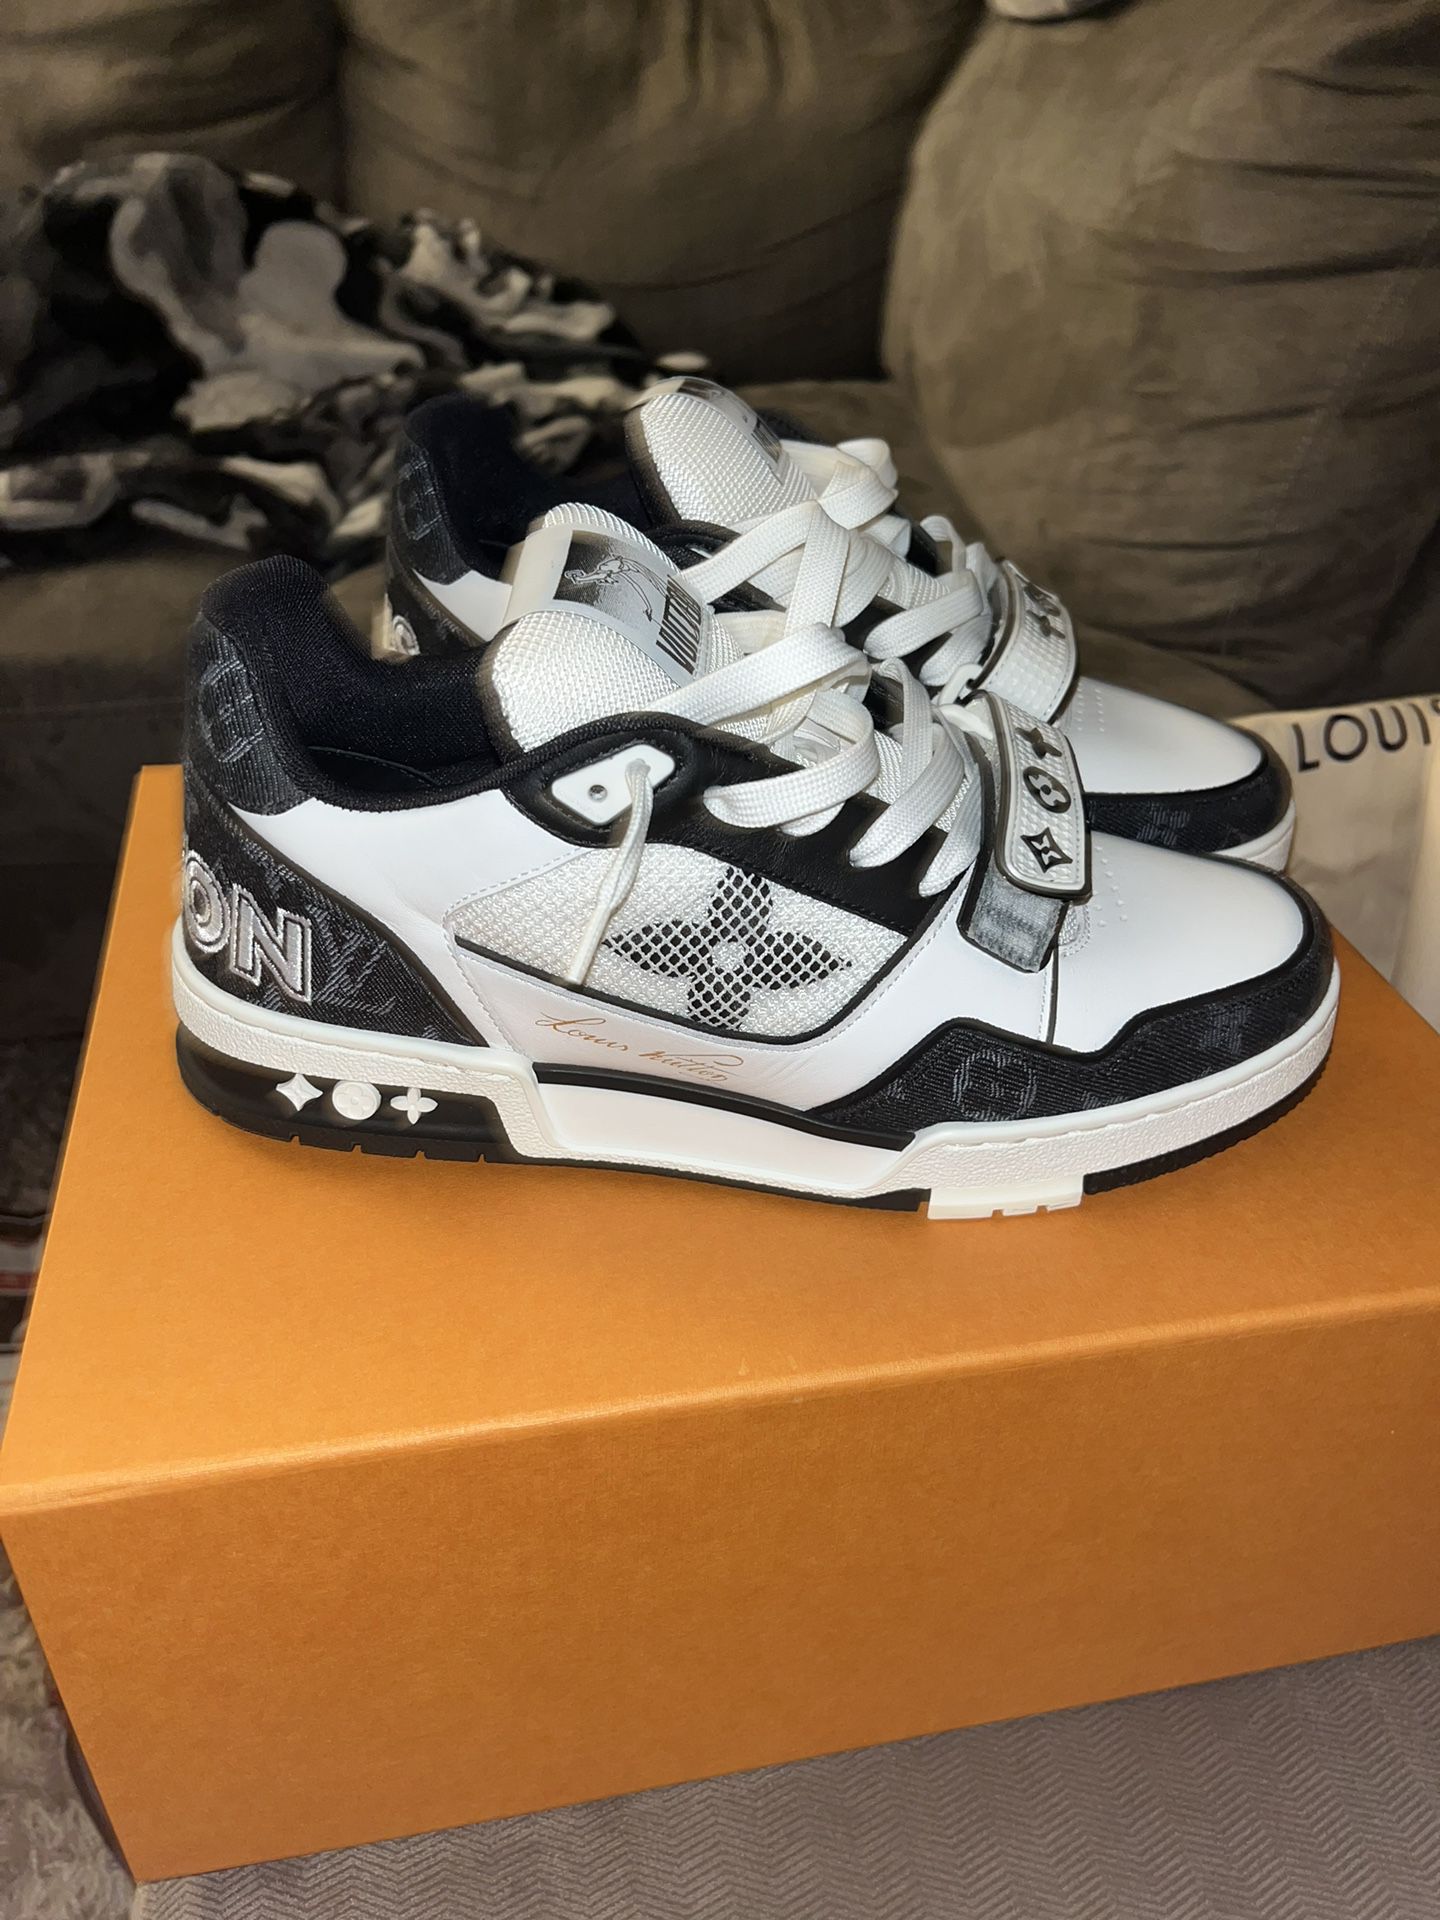 Louis Vuitton Trainer 75 for Sale in Chicago, IL - OfferUp